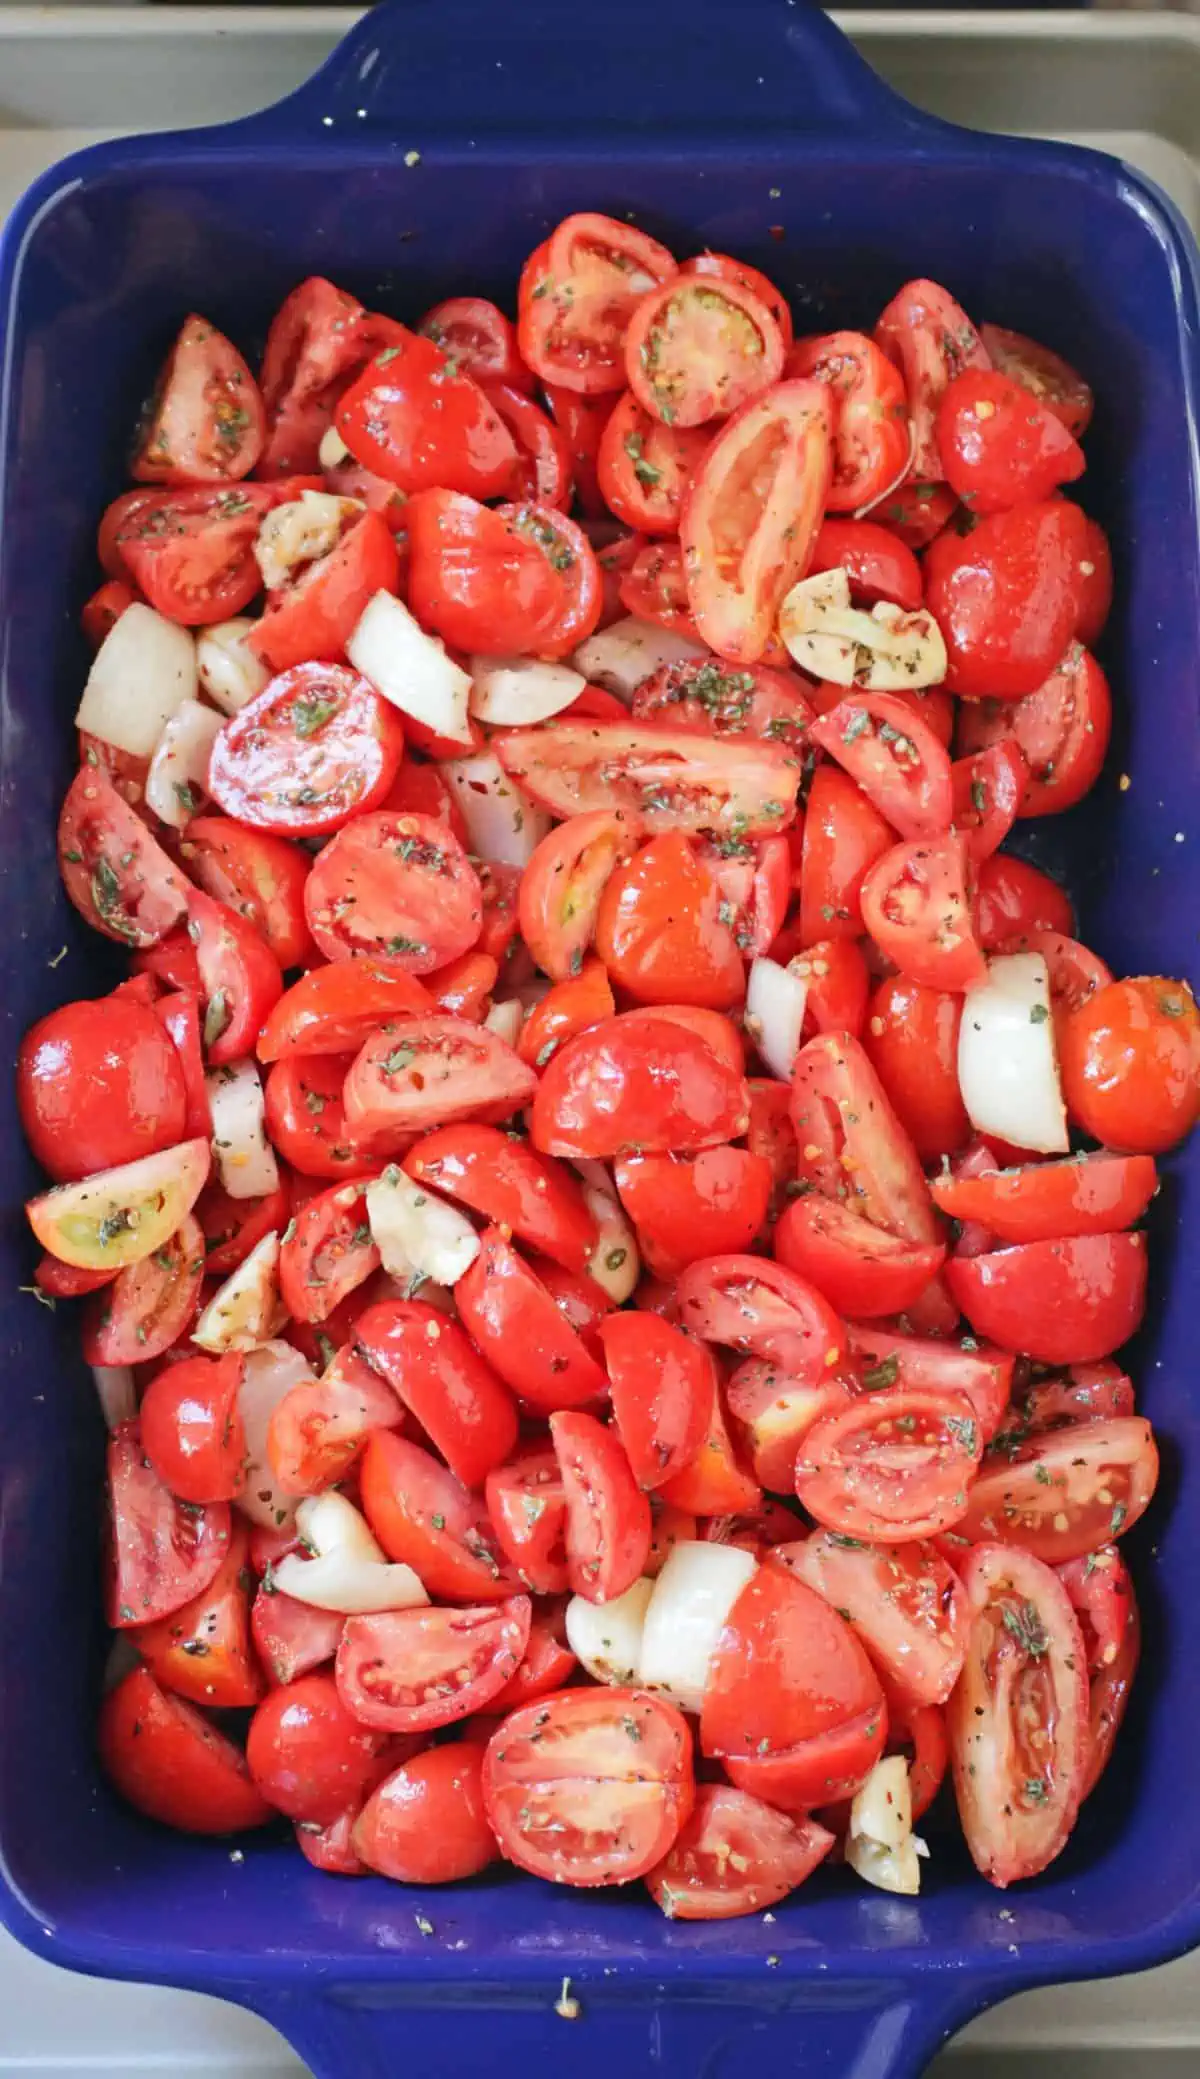 tomato onion and spices in a baking tray